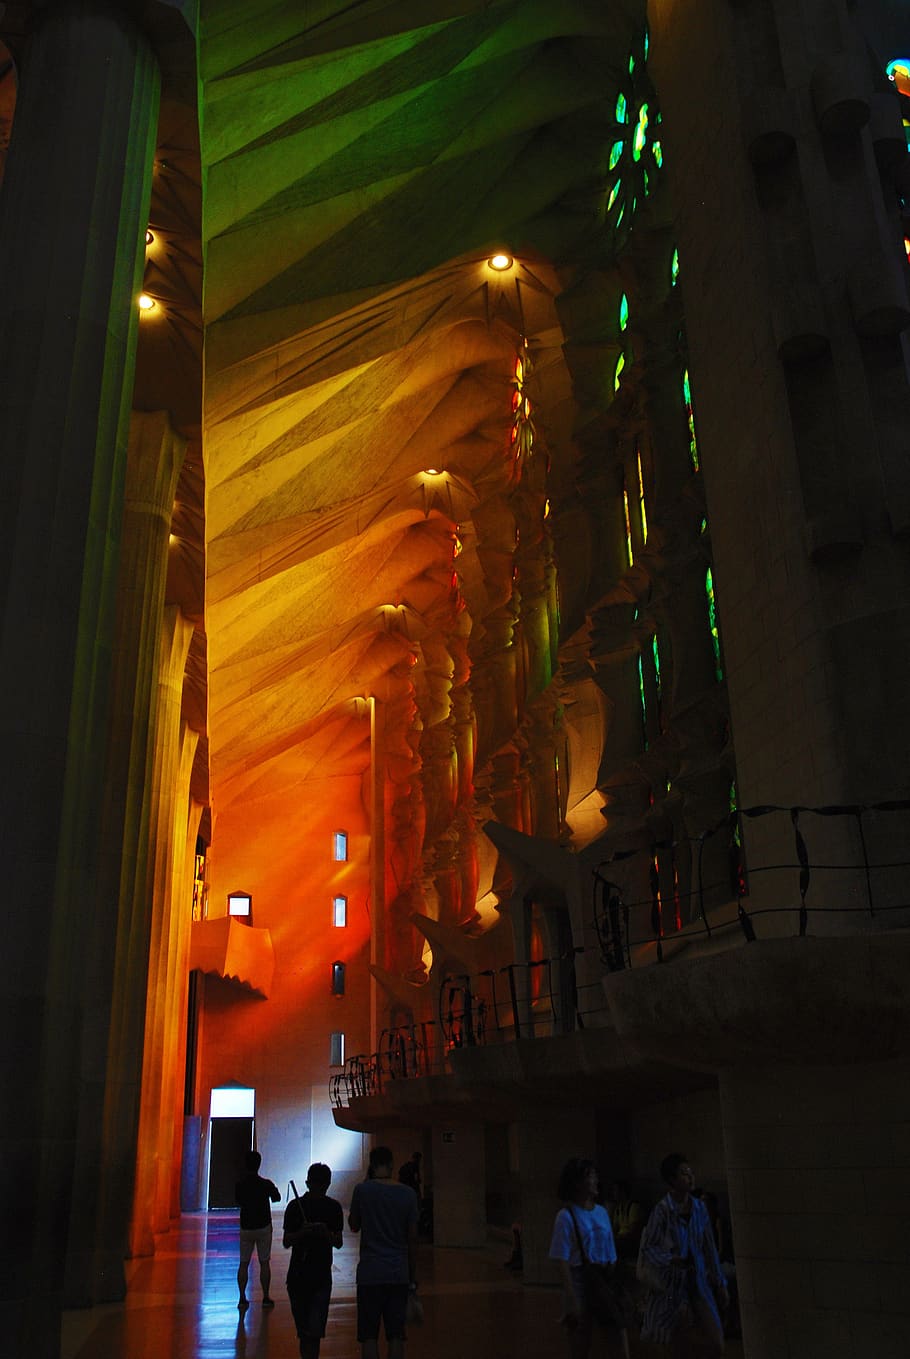 color, colorful, sagrada familia, interior, stained glass windows, transparent, artistic, gaudí, good looking, architecture